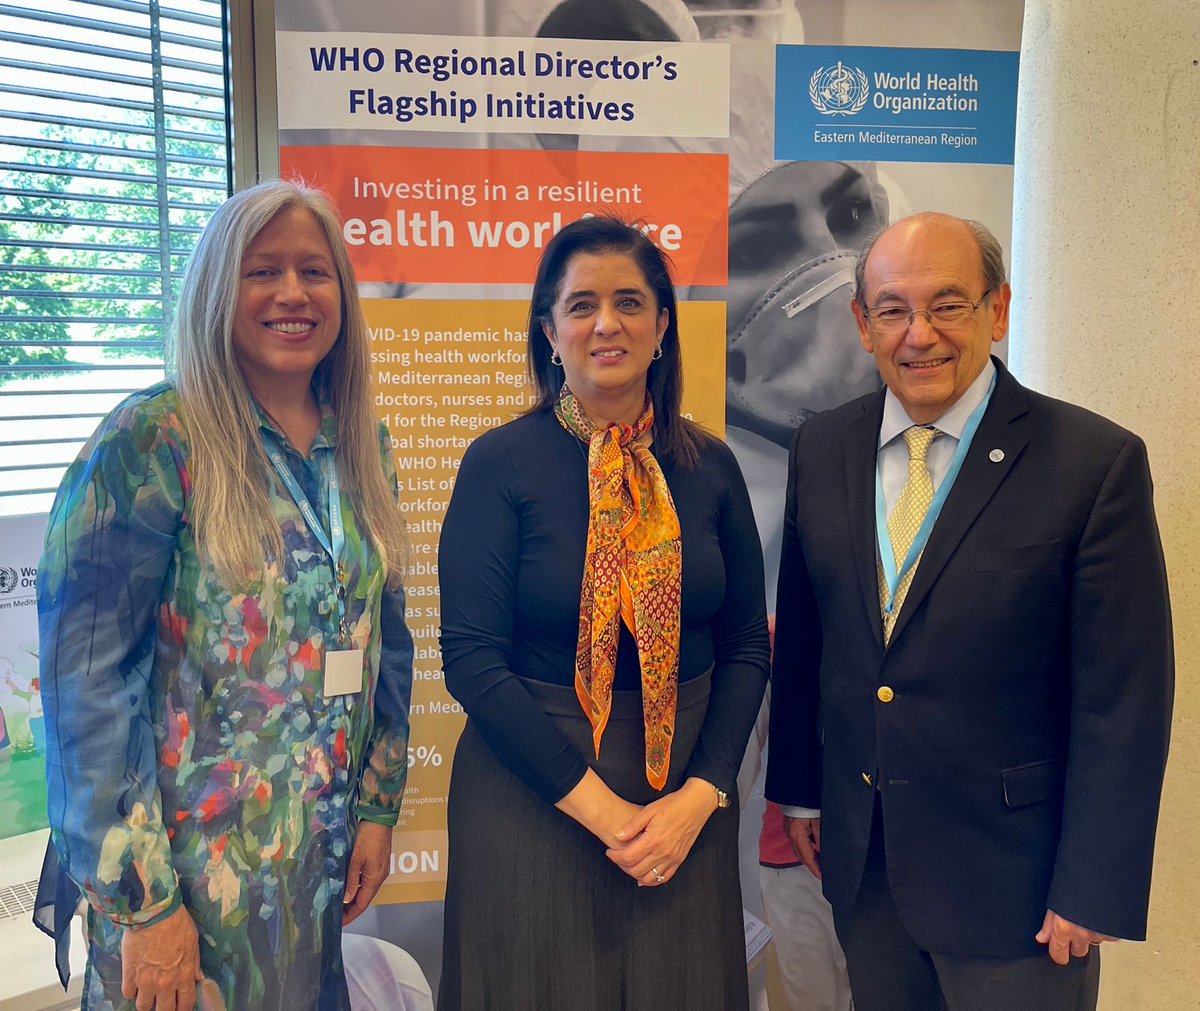 Wonderful to meet Prof Ricardo León-Bórquez and Dr Geneviève Moineau, President and Vice-President of @wfmeorg, to seek innovative ways to enhance the accreditation of medical education, ensure continuity of education in conflict-affected countries and rebuild it again where